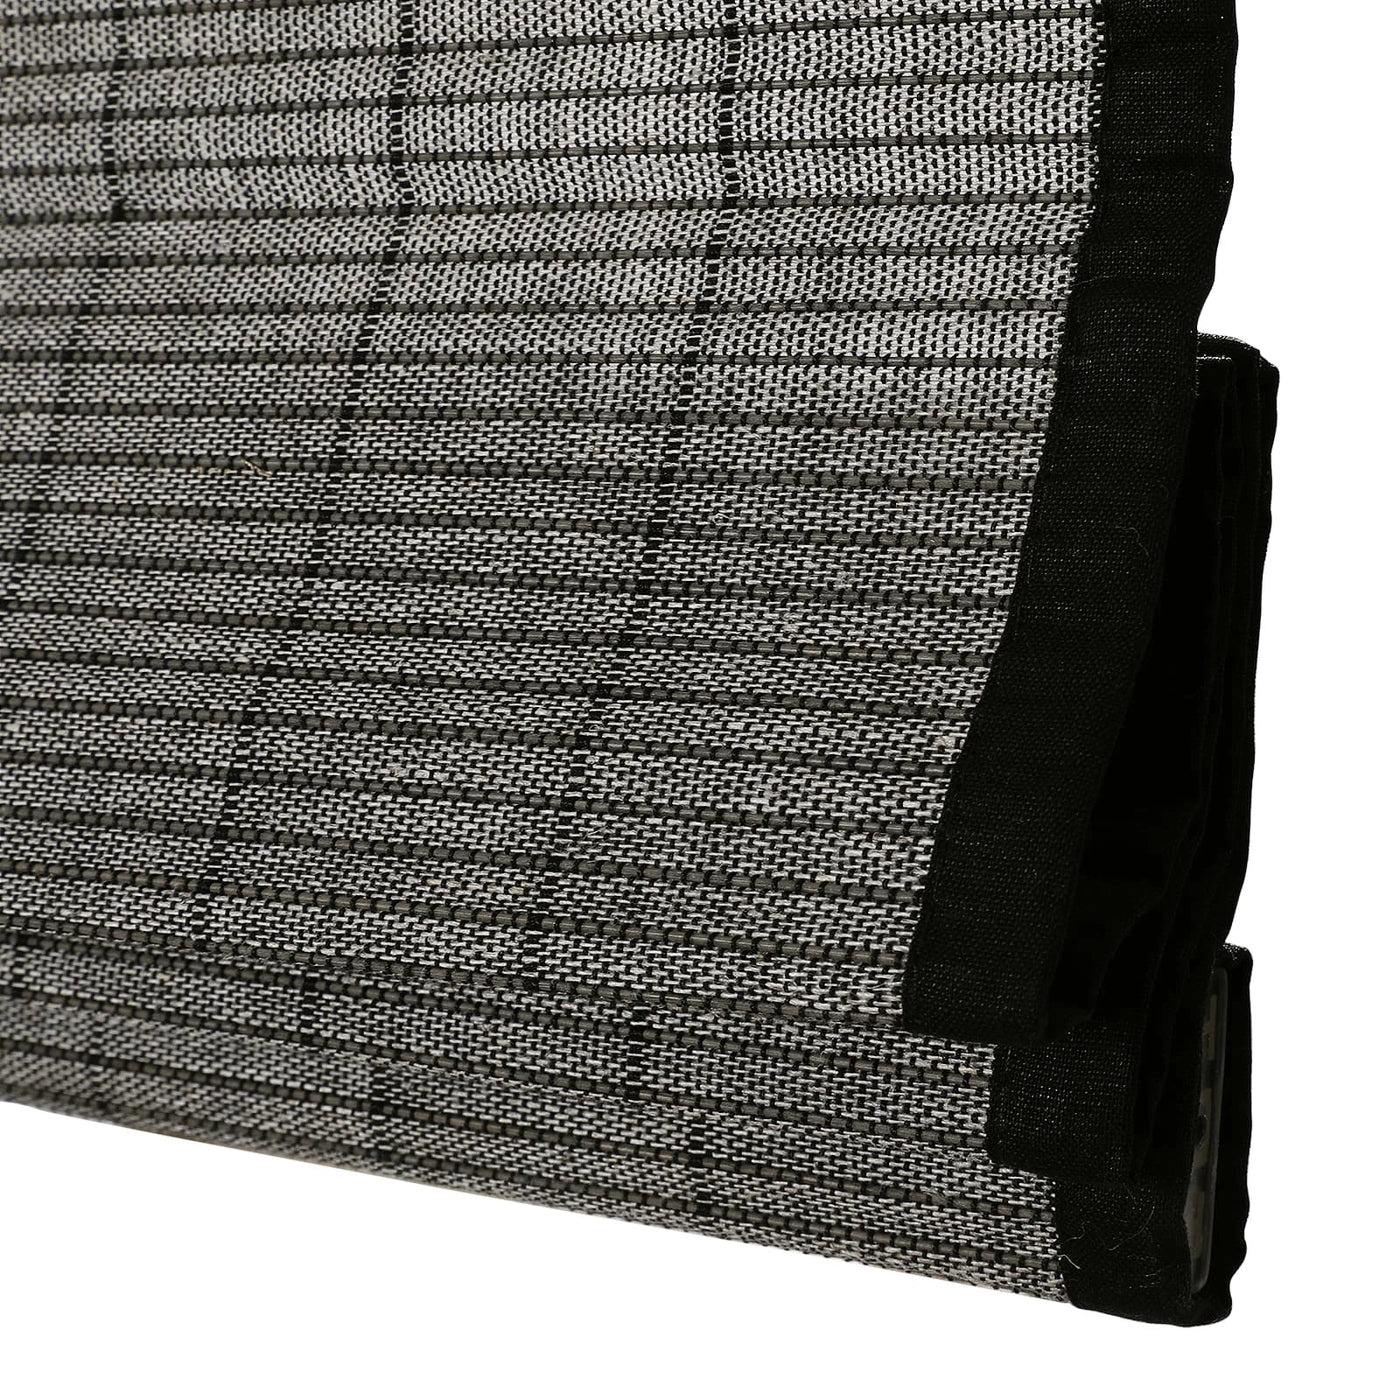 Natural Flax Bamboo Woven Shade - Middle Grey